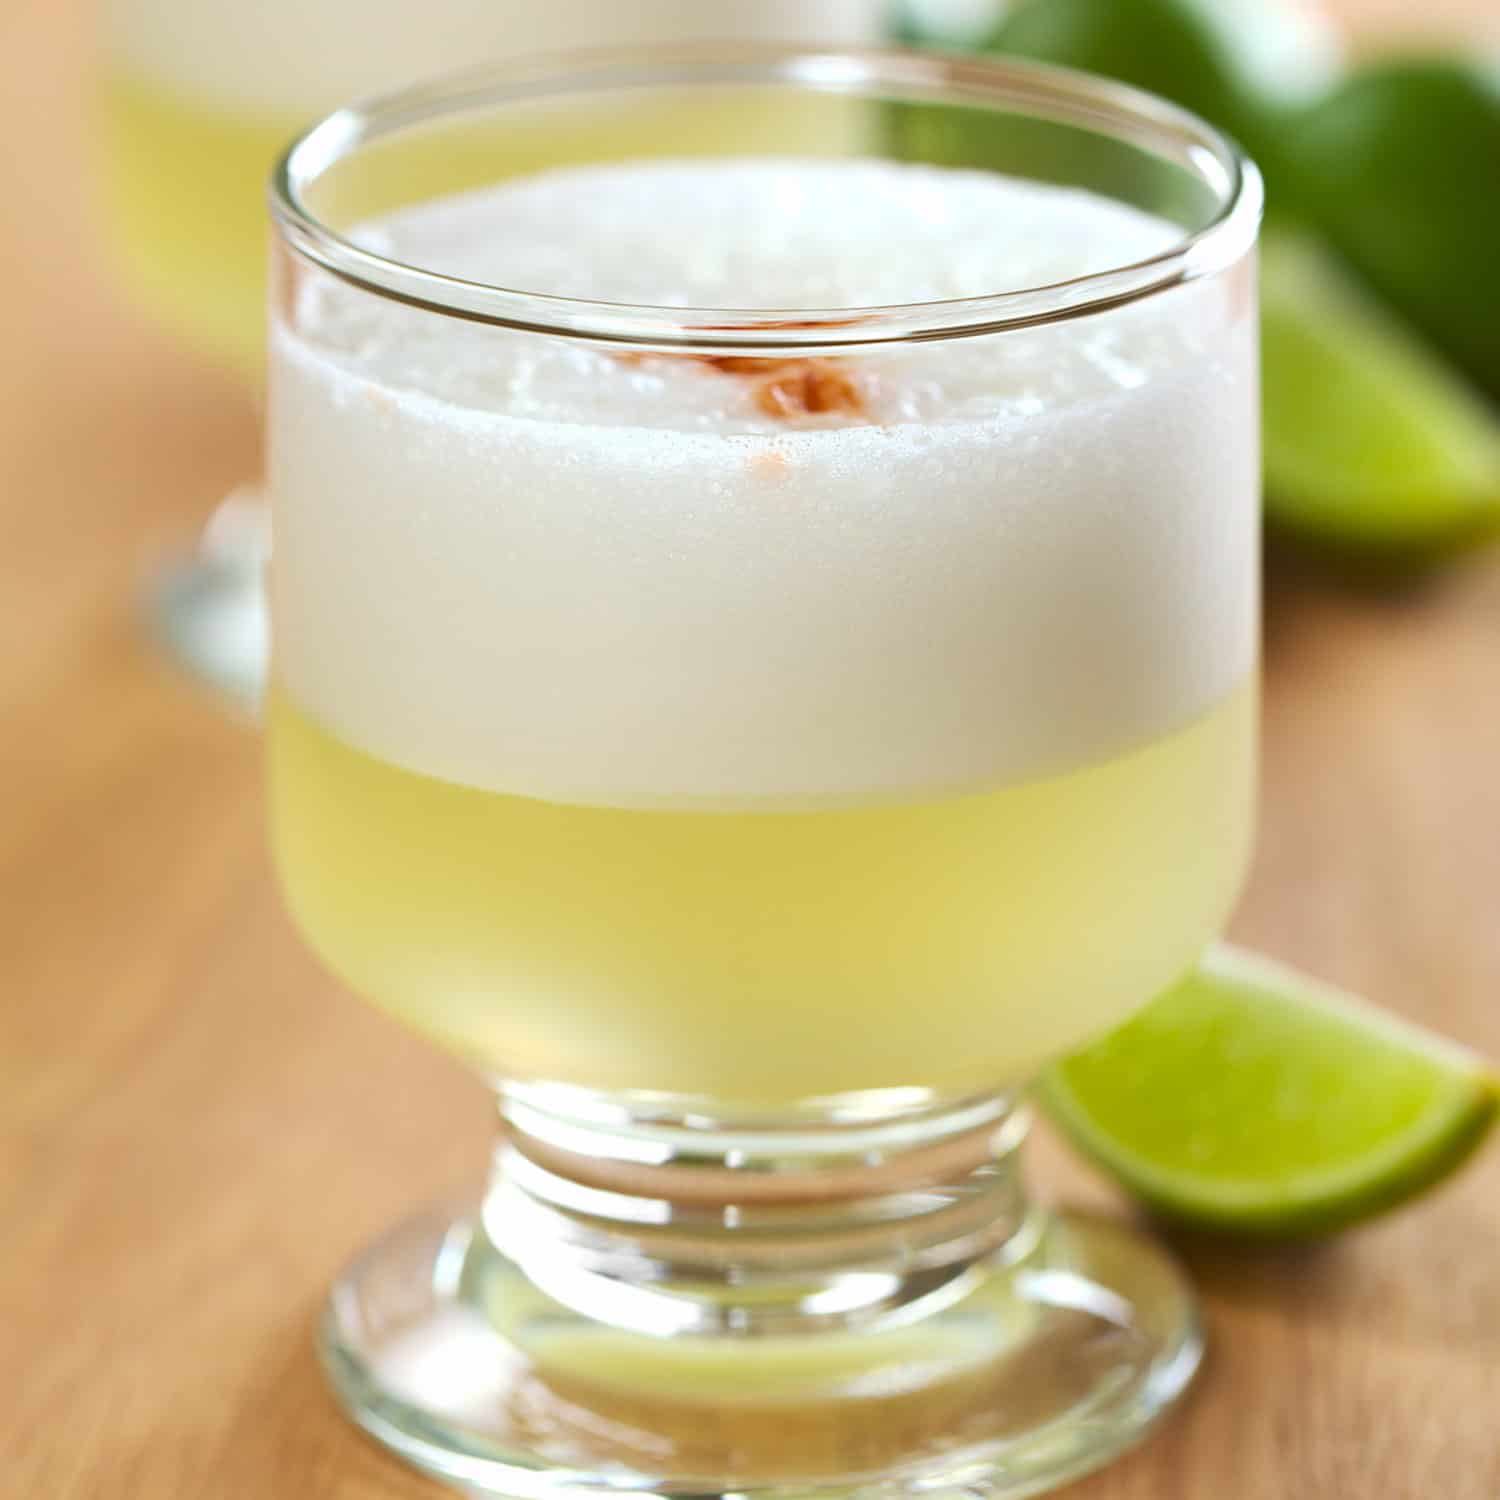 Easiest Pisco Sour Recipe from Peru - Bacon is Magic